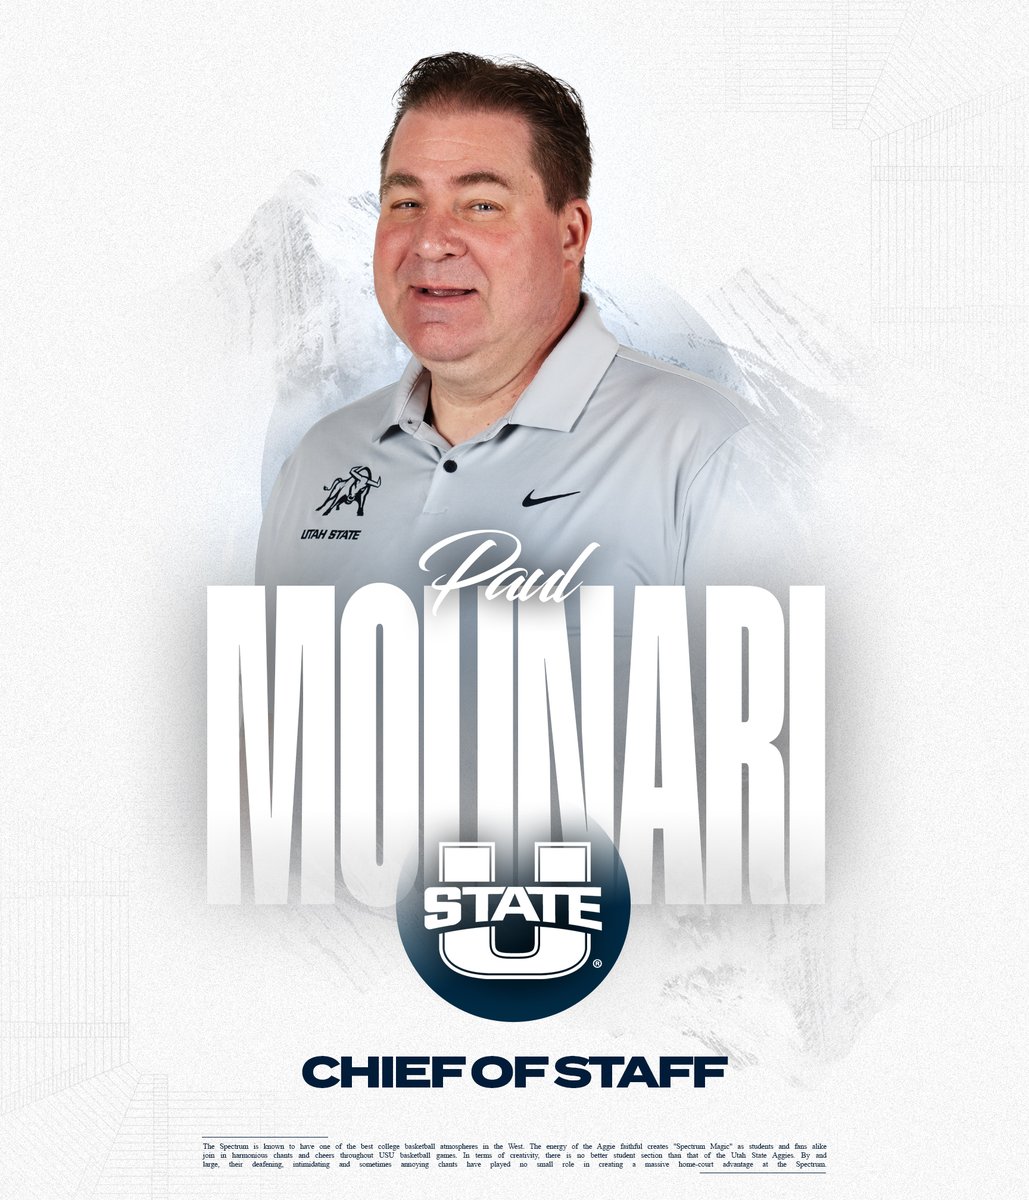 Welcome to the squad @pmolinari24! Molinari joins @usubasketball as the Chief of Staff. ➡️ bit.ly/3UKozCs